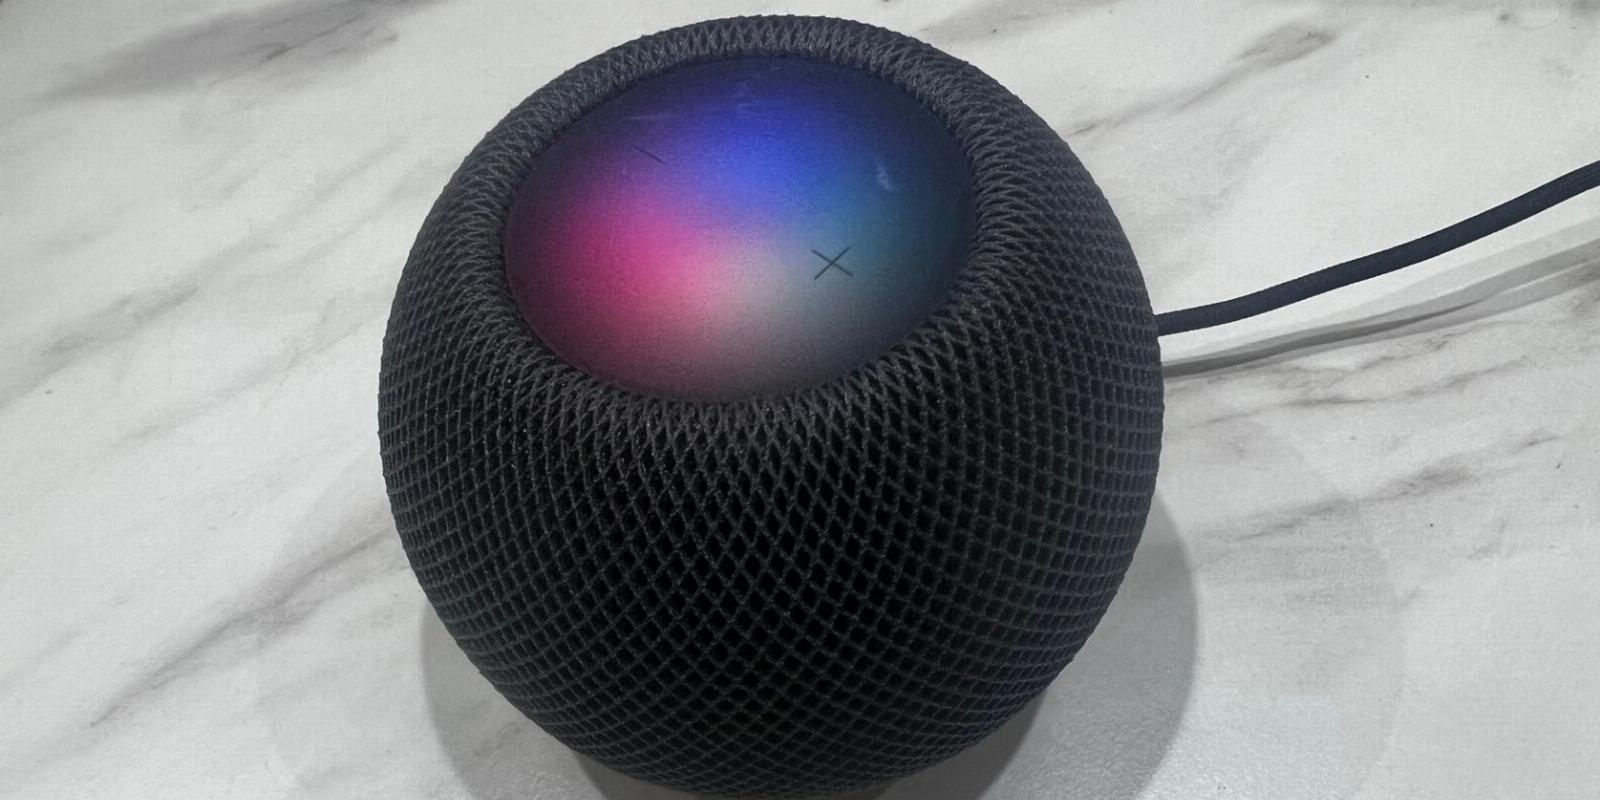 How to Create a Security Alarm With HomePod and HomeKit